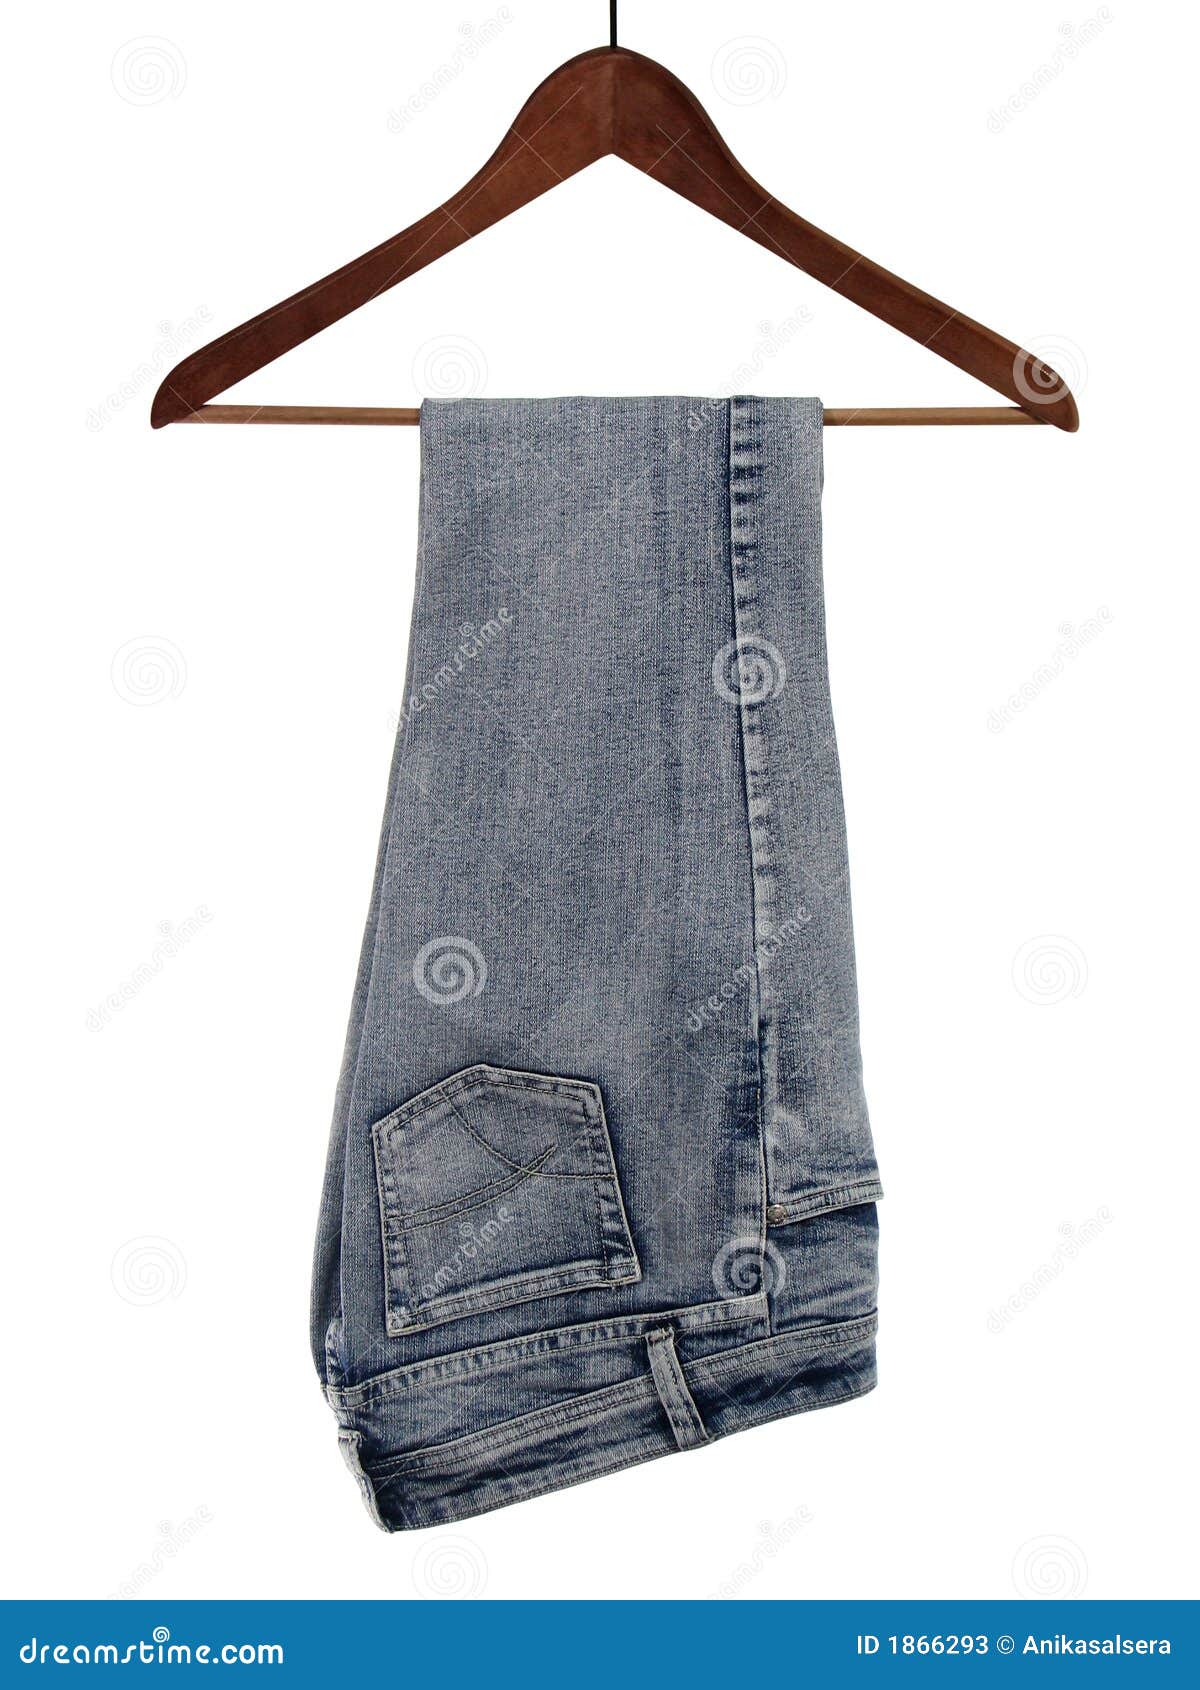 Jeans on a wooden hanger stock image. Image of apparel - 1866293